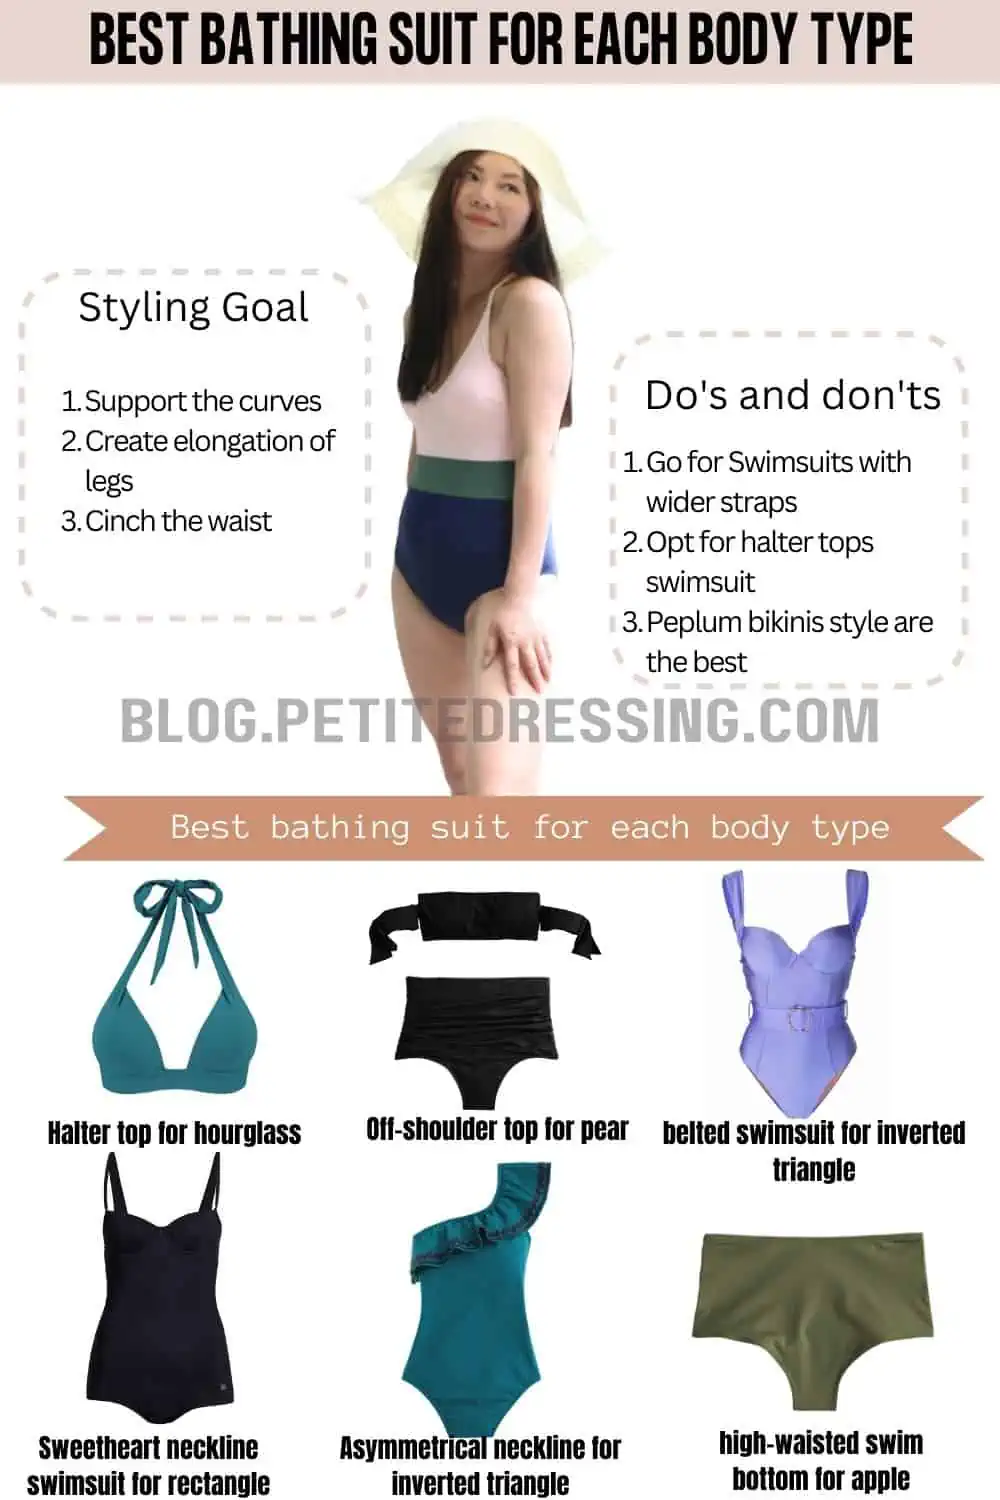 How to Find The Best Swimsuit for My Body Type